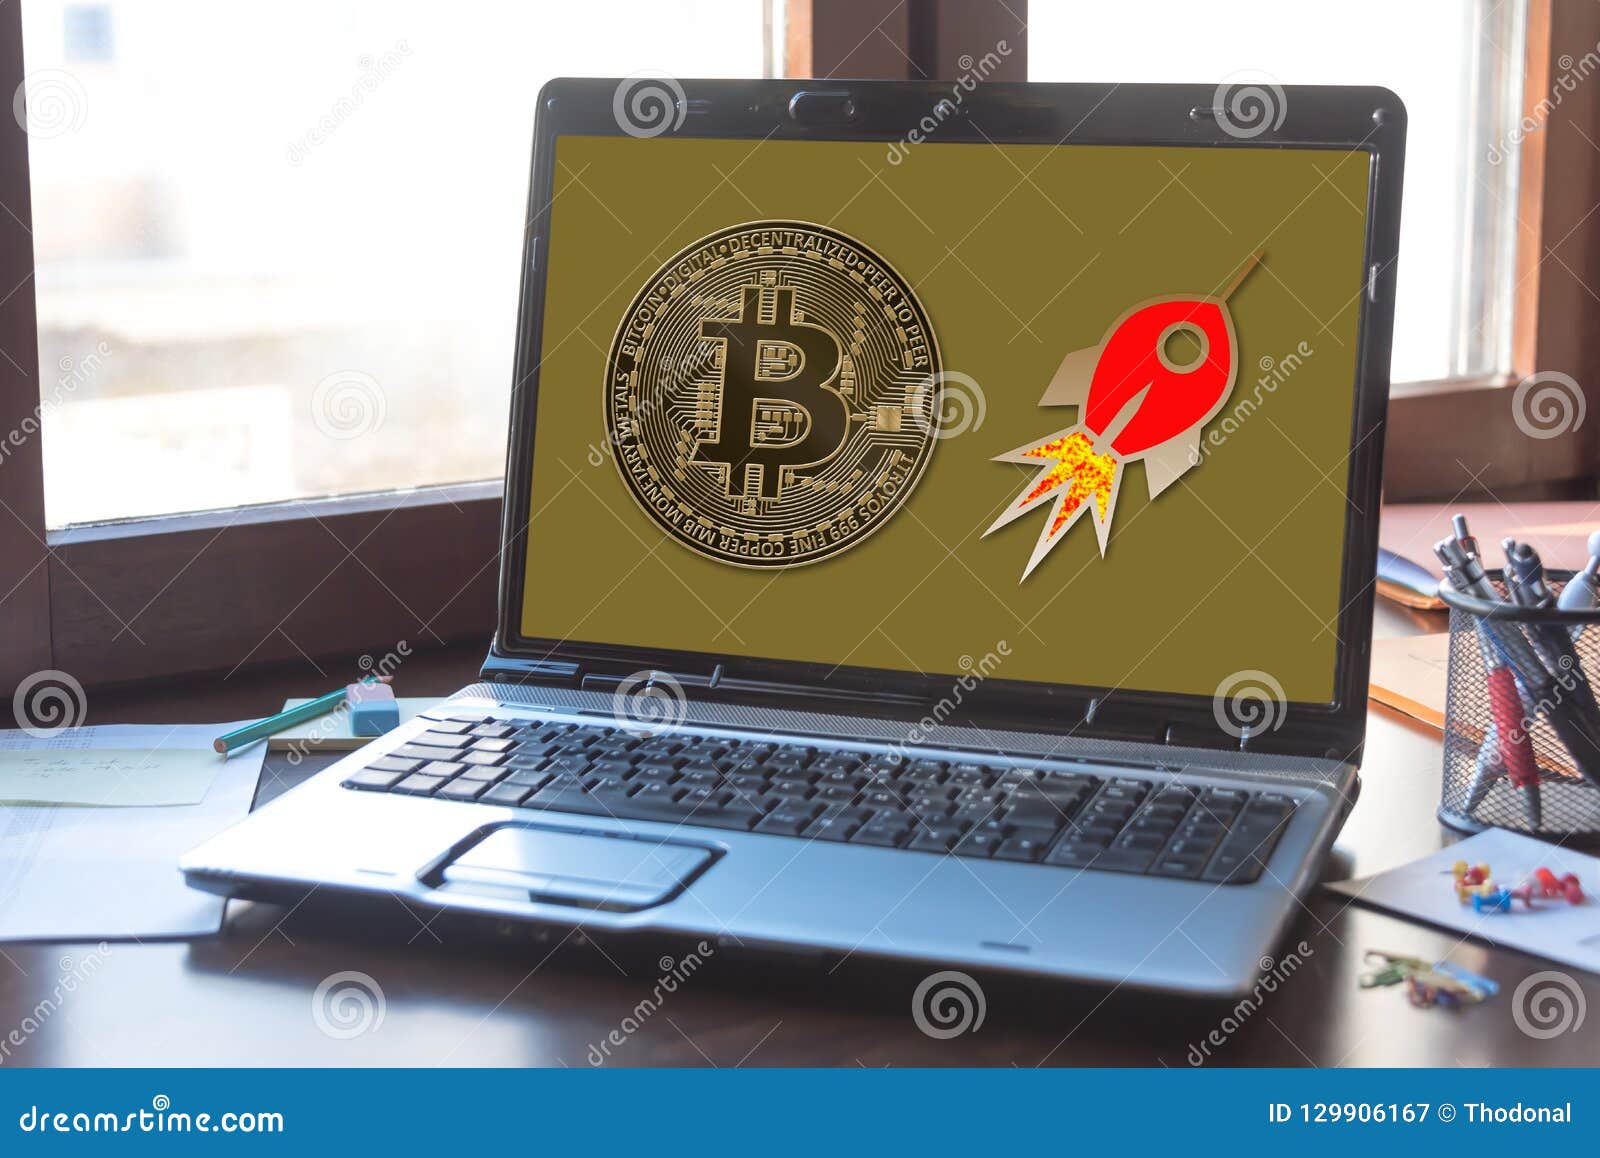 how to buy laptop with bitcoin